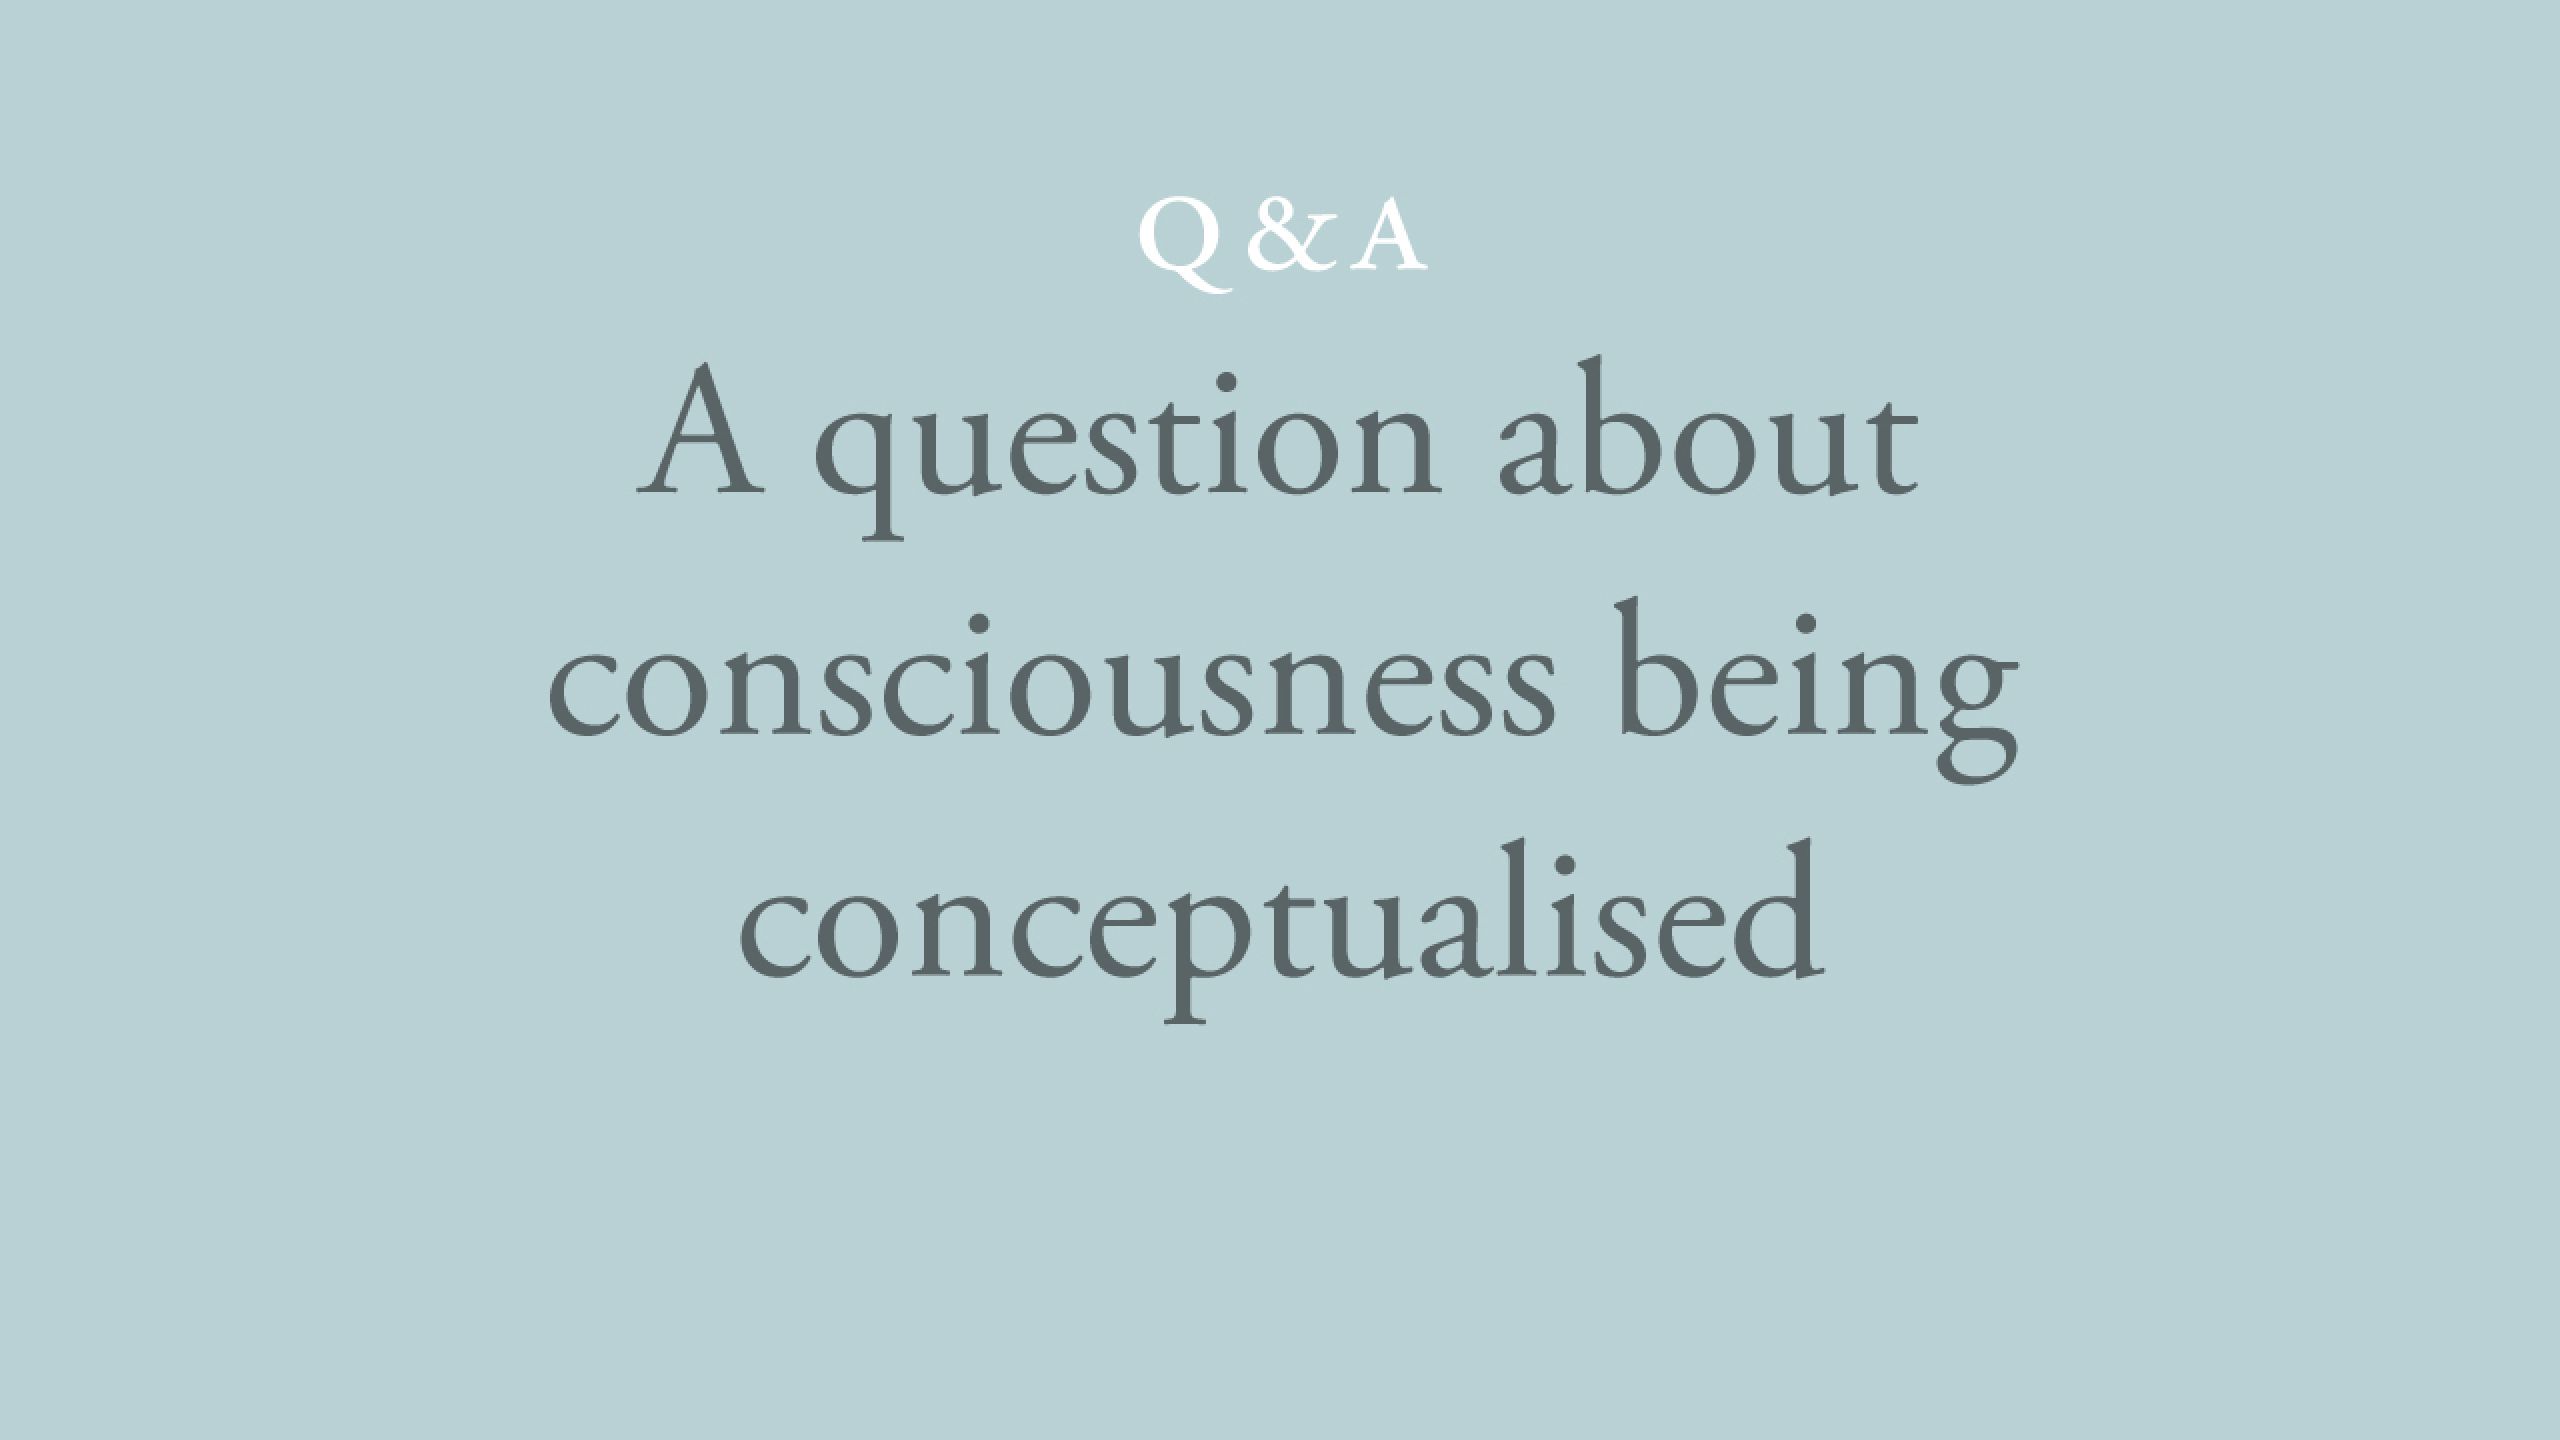 Would you agree that consciousness cannot be conceptualised?